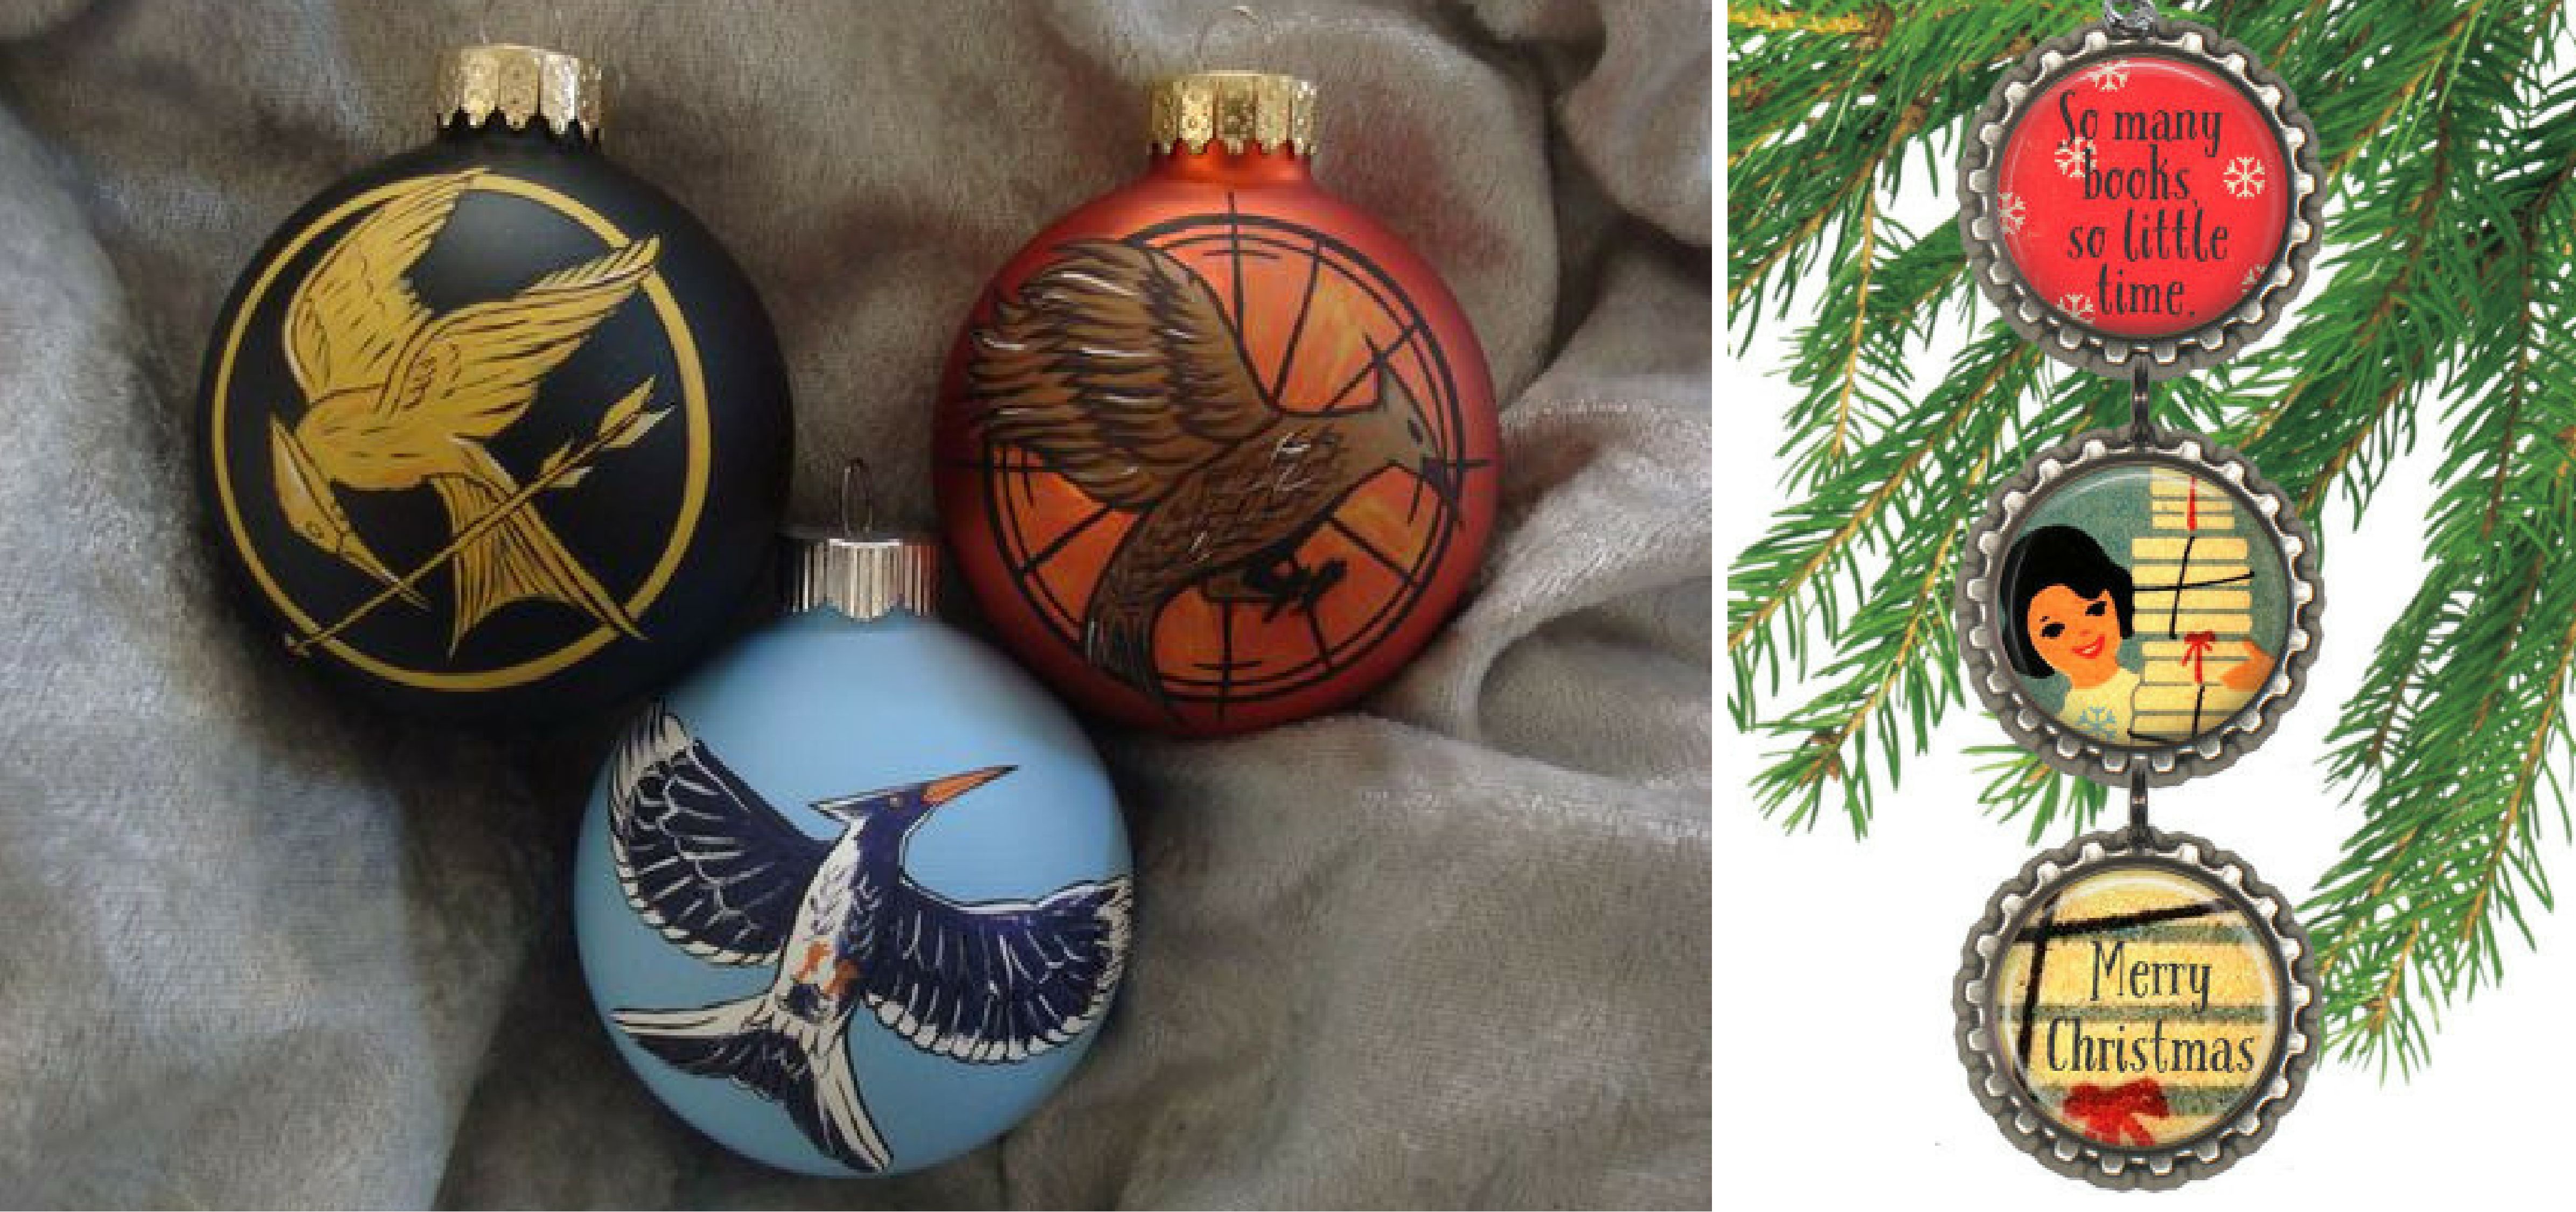 19 Christmas Ornaments For Book Lovers